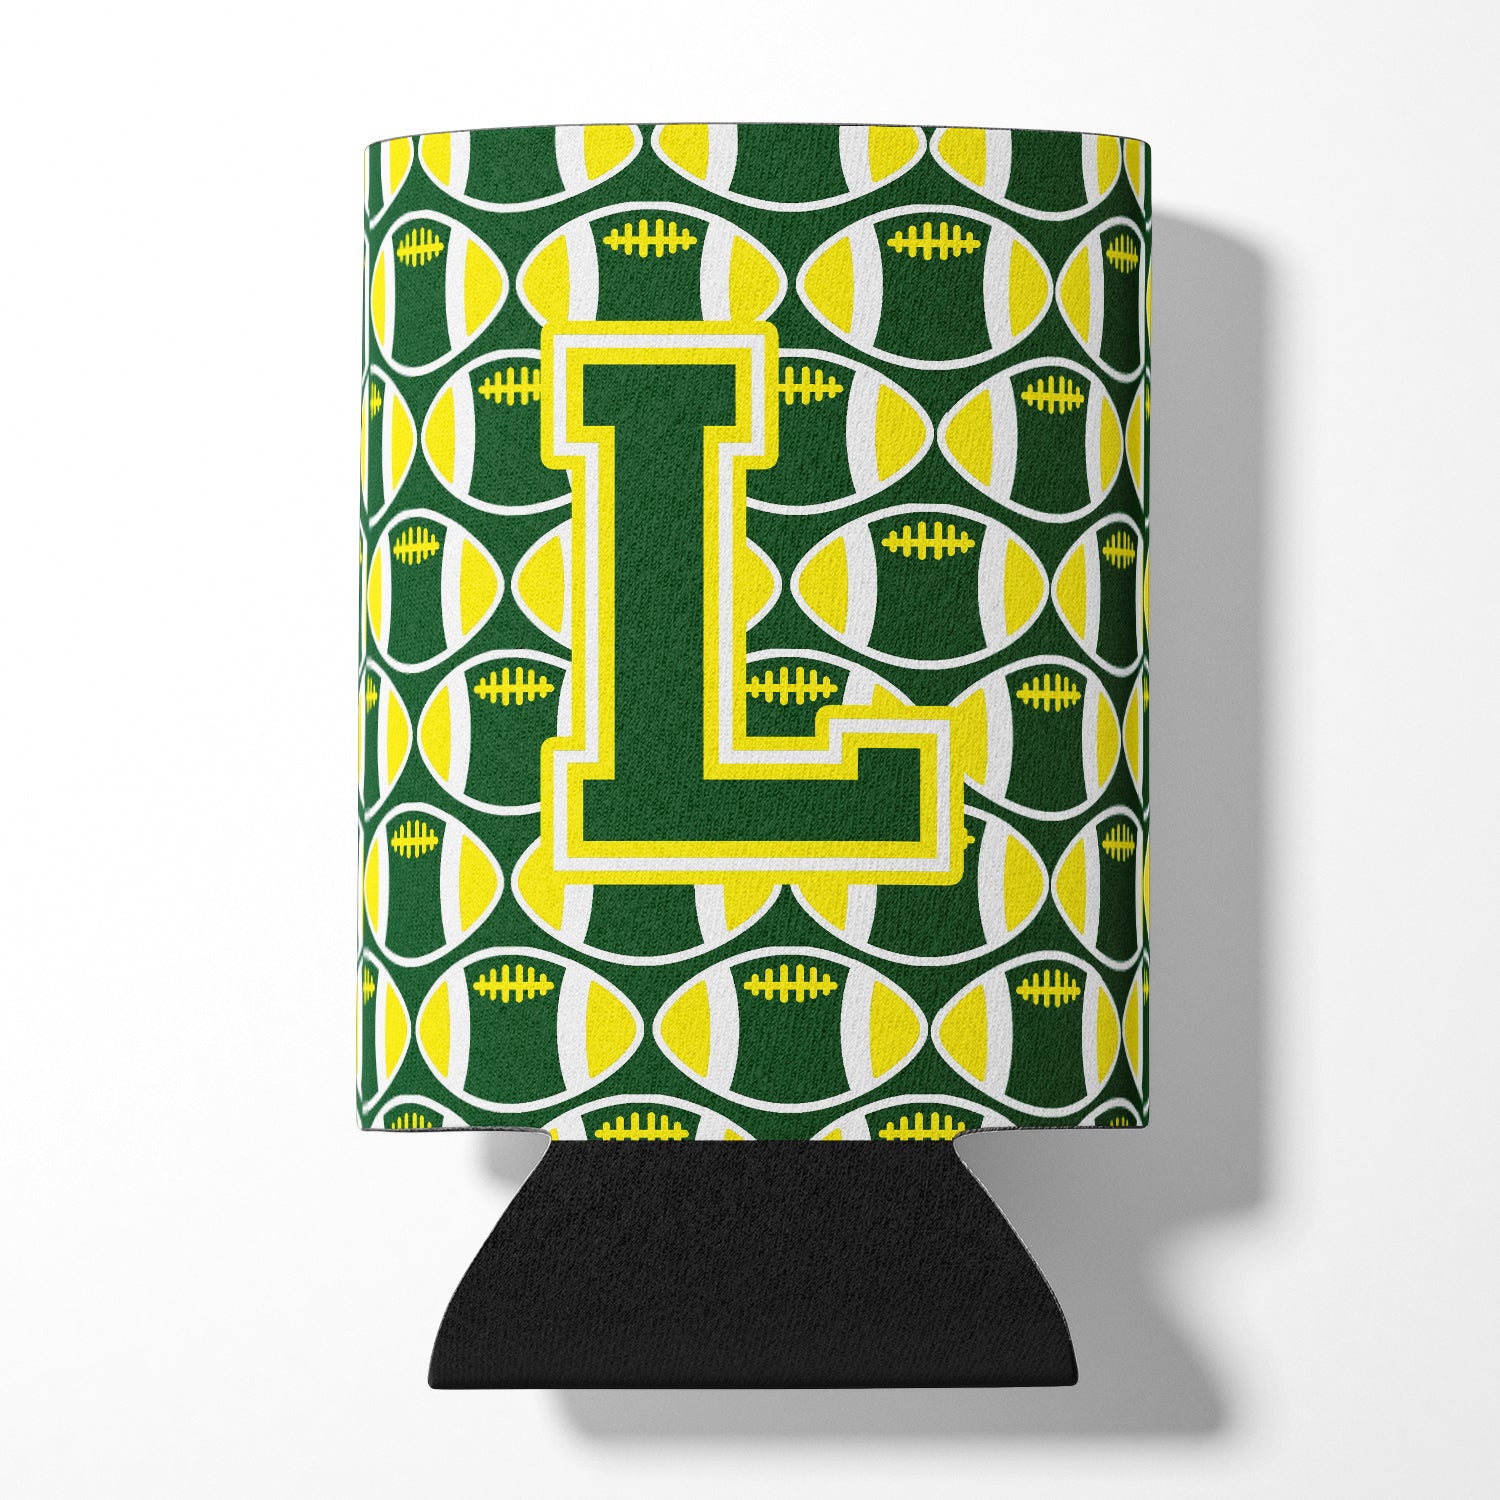 Letter L Football Green and Yellow Can or Bottle Hugger CJ1075-LCC.